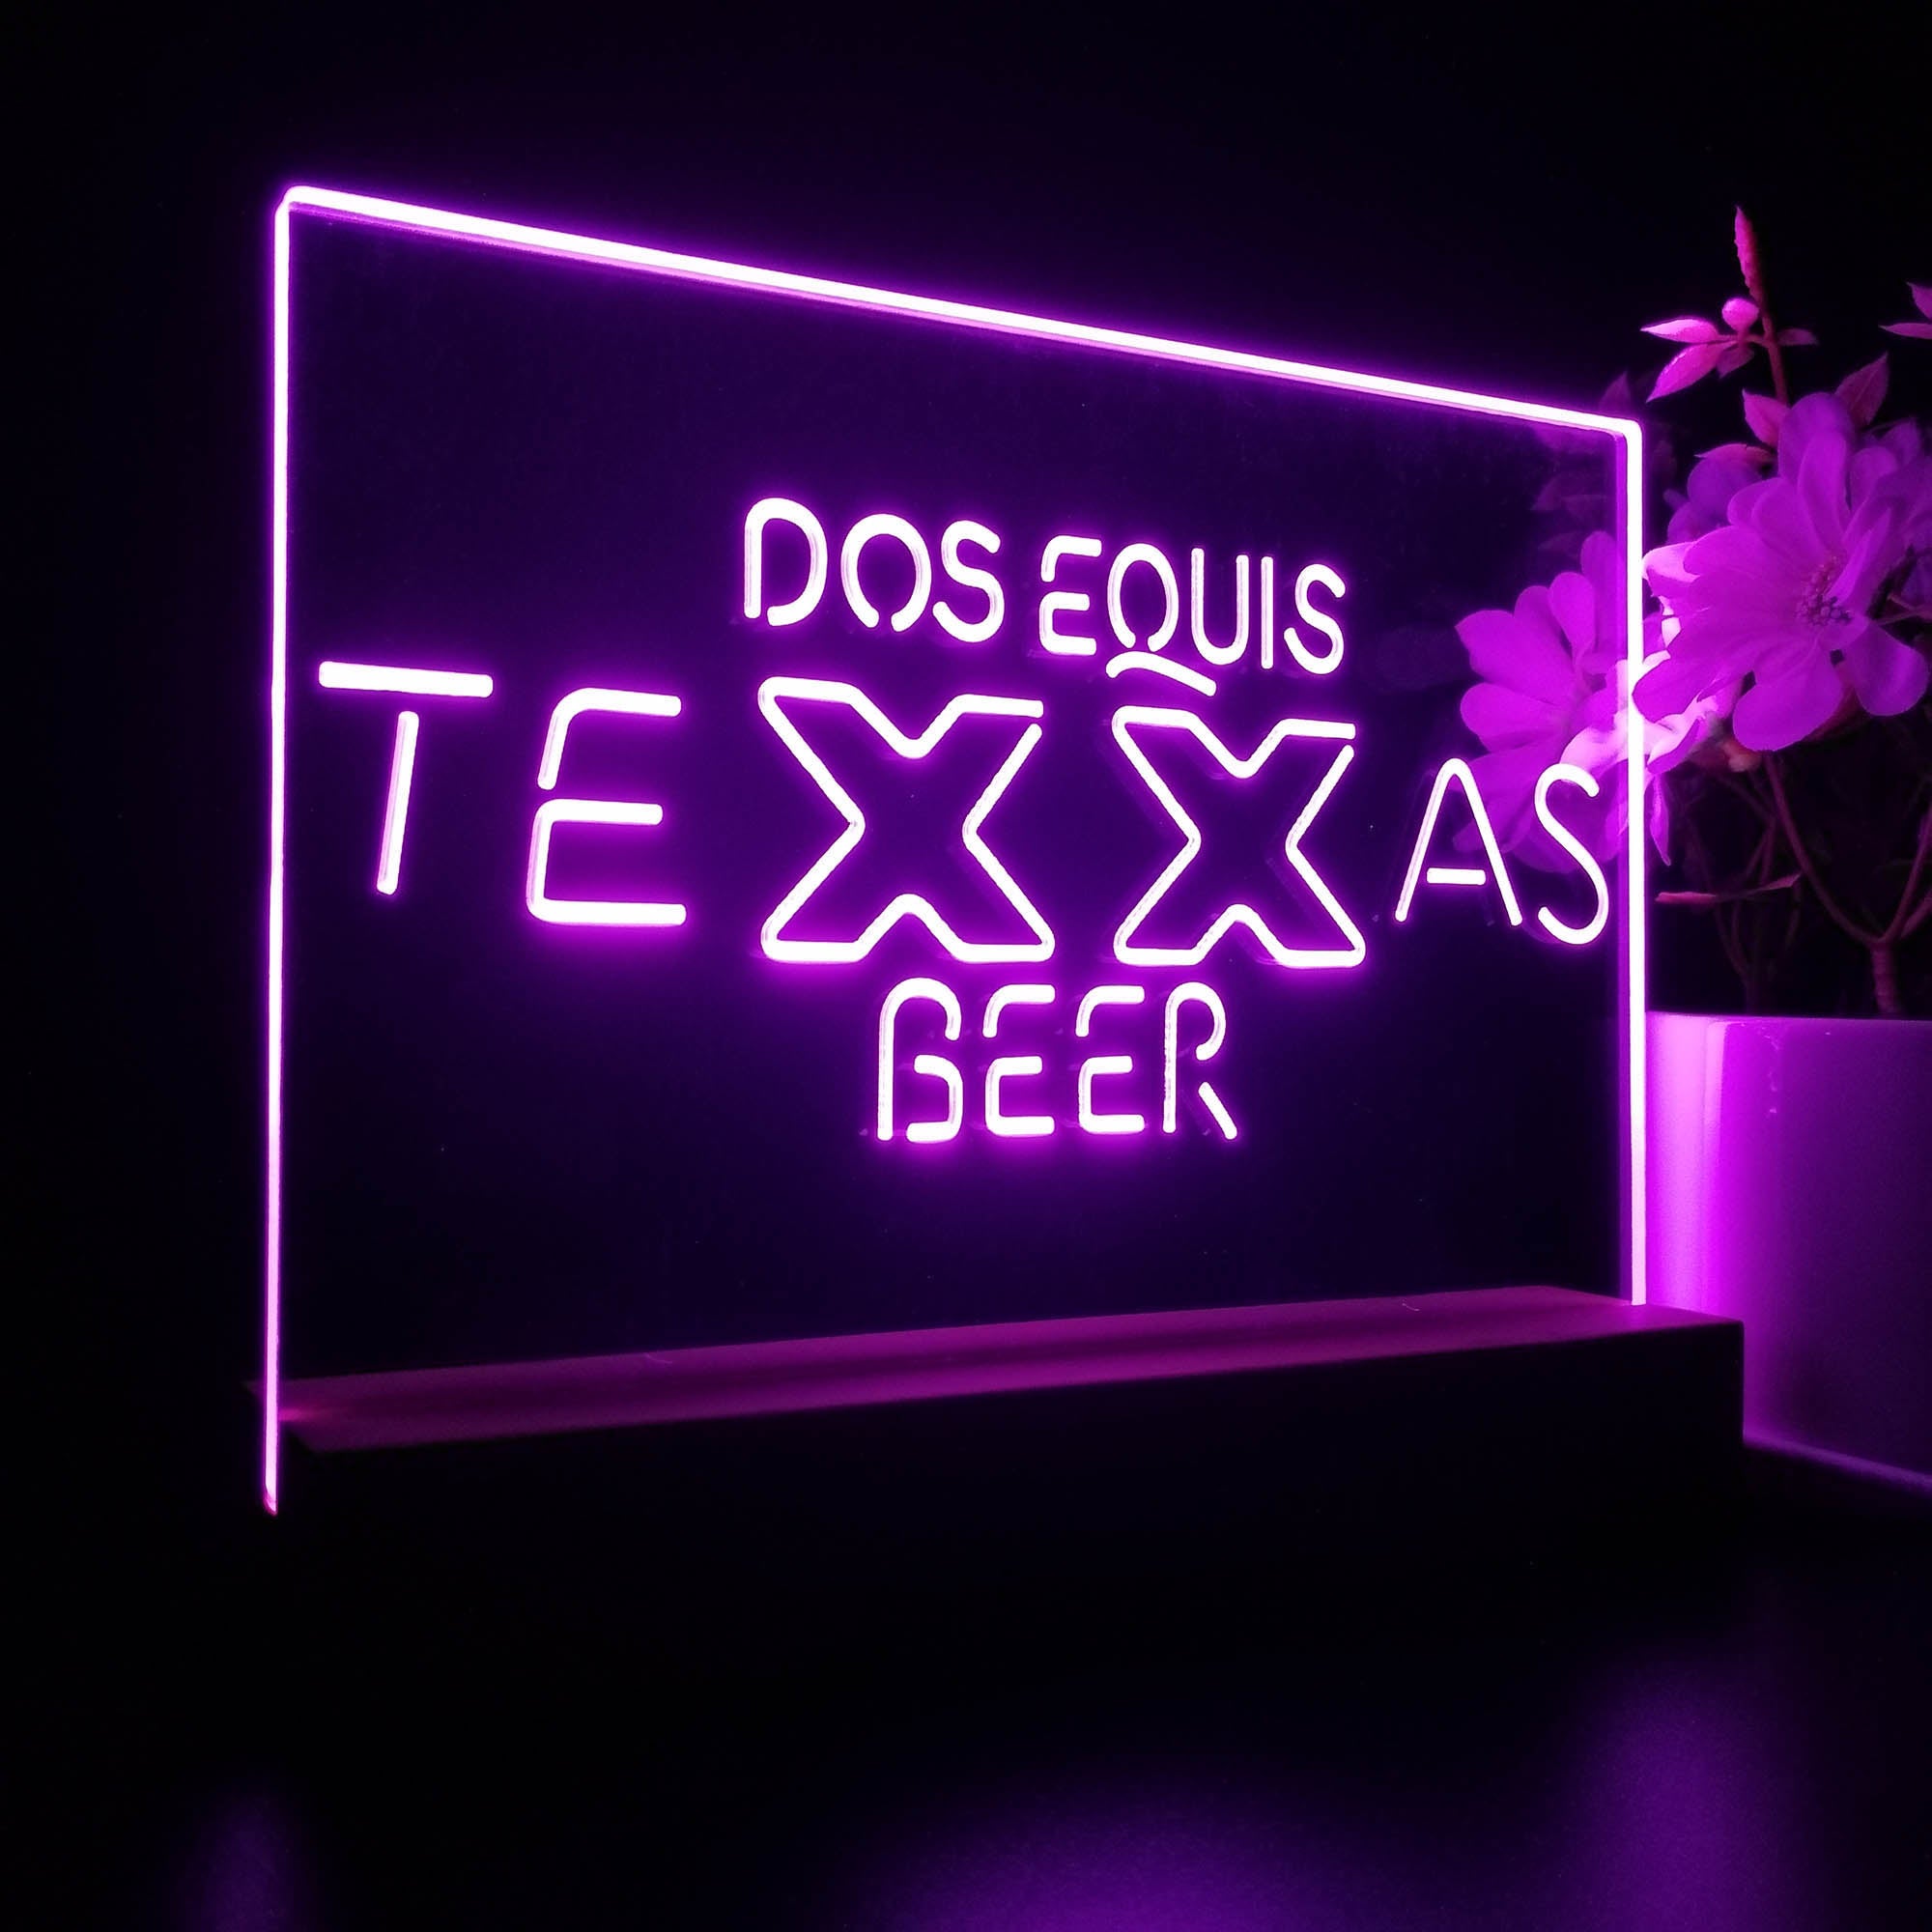 Texas Dos Equis Beer Night Light LED Sign